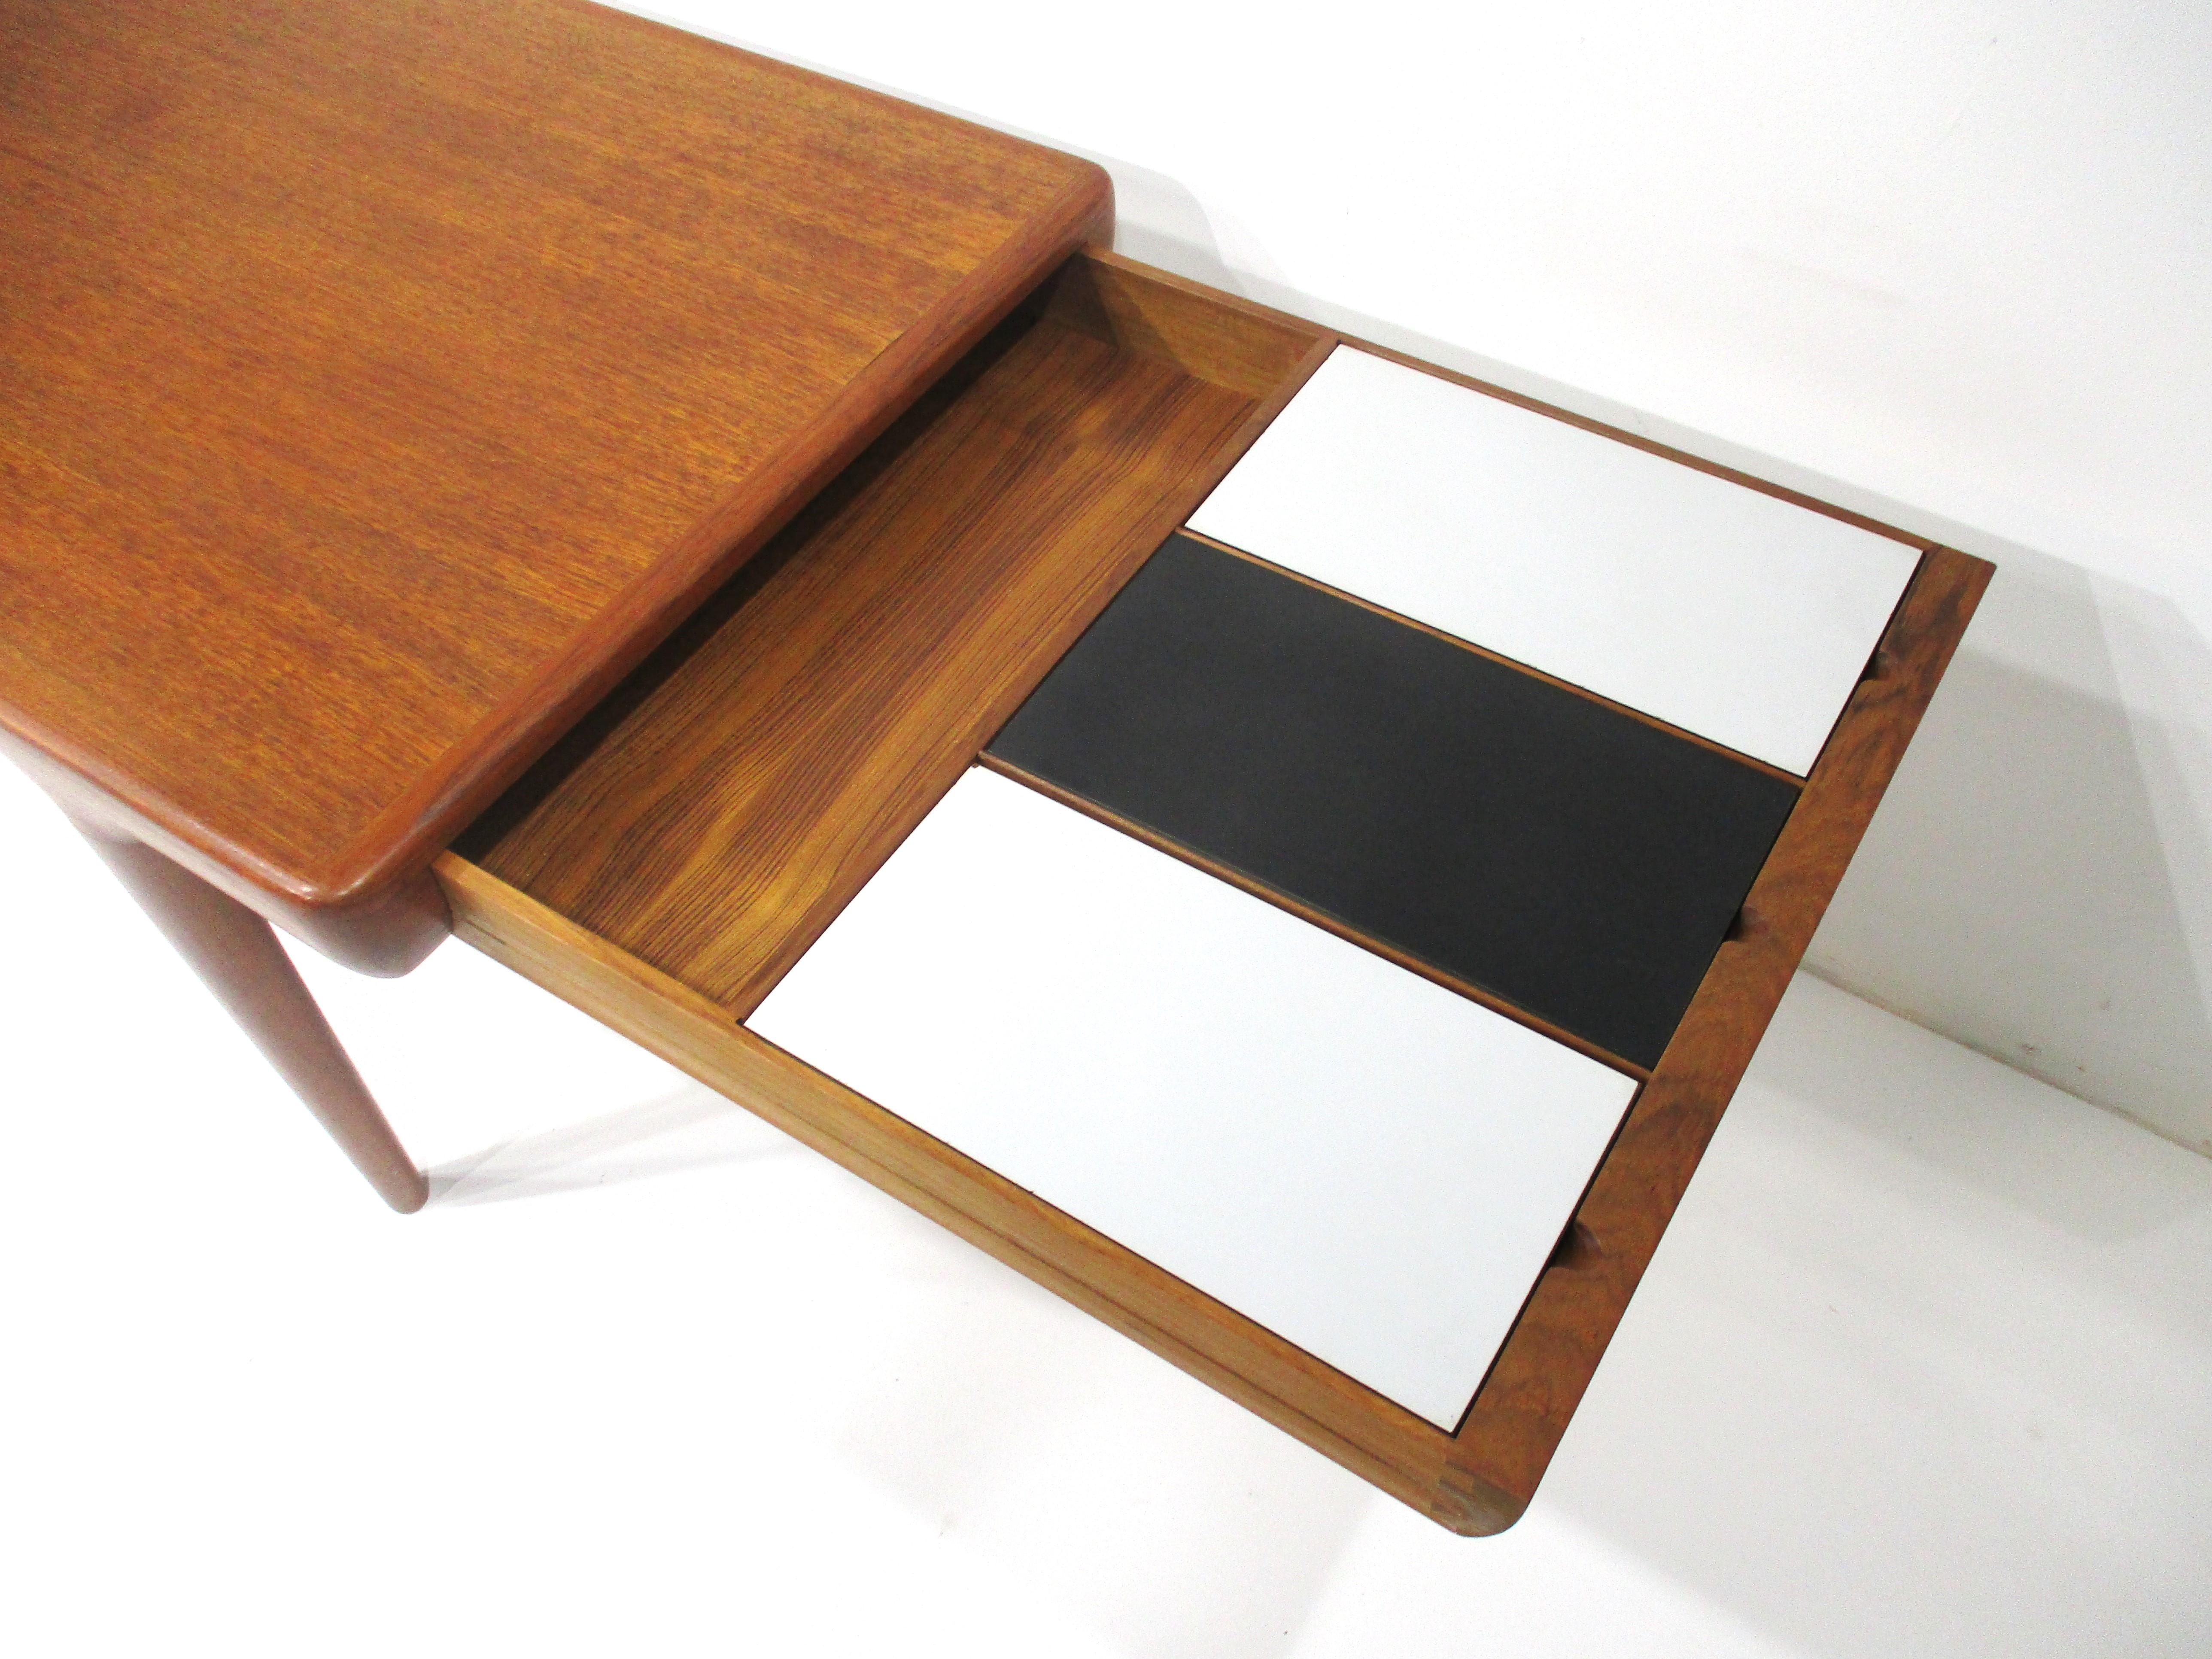 Teak Coffee Table w/ Pull Out Ends by Silkeborg -Johannes Andersen Denmark  2